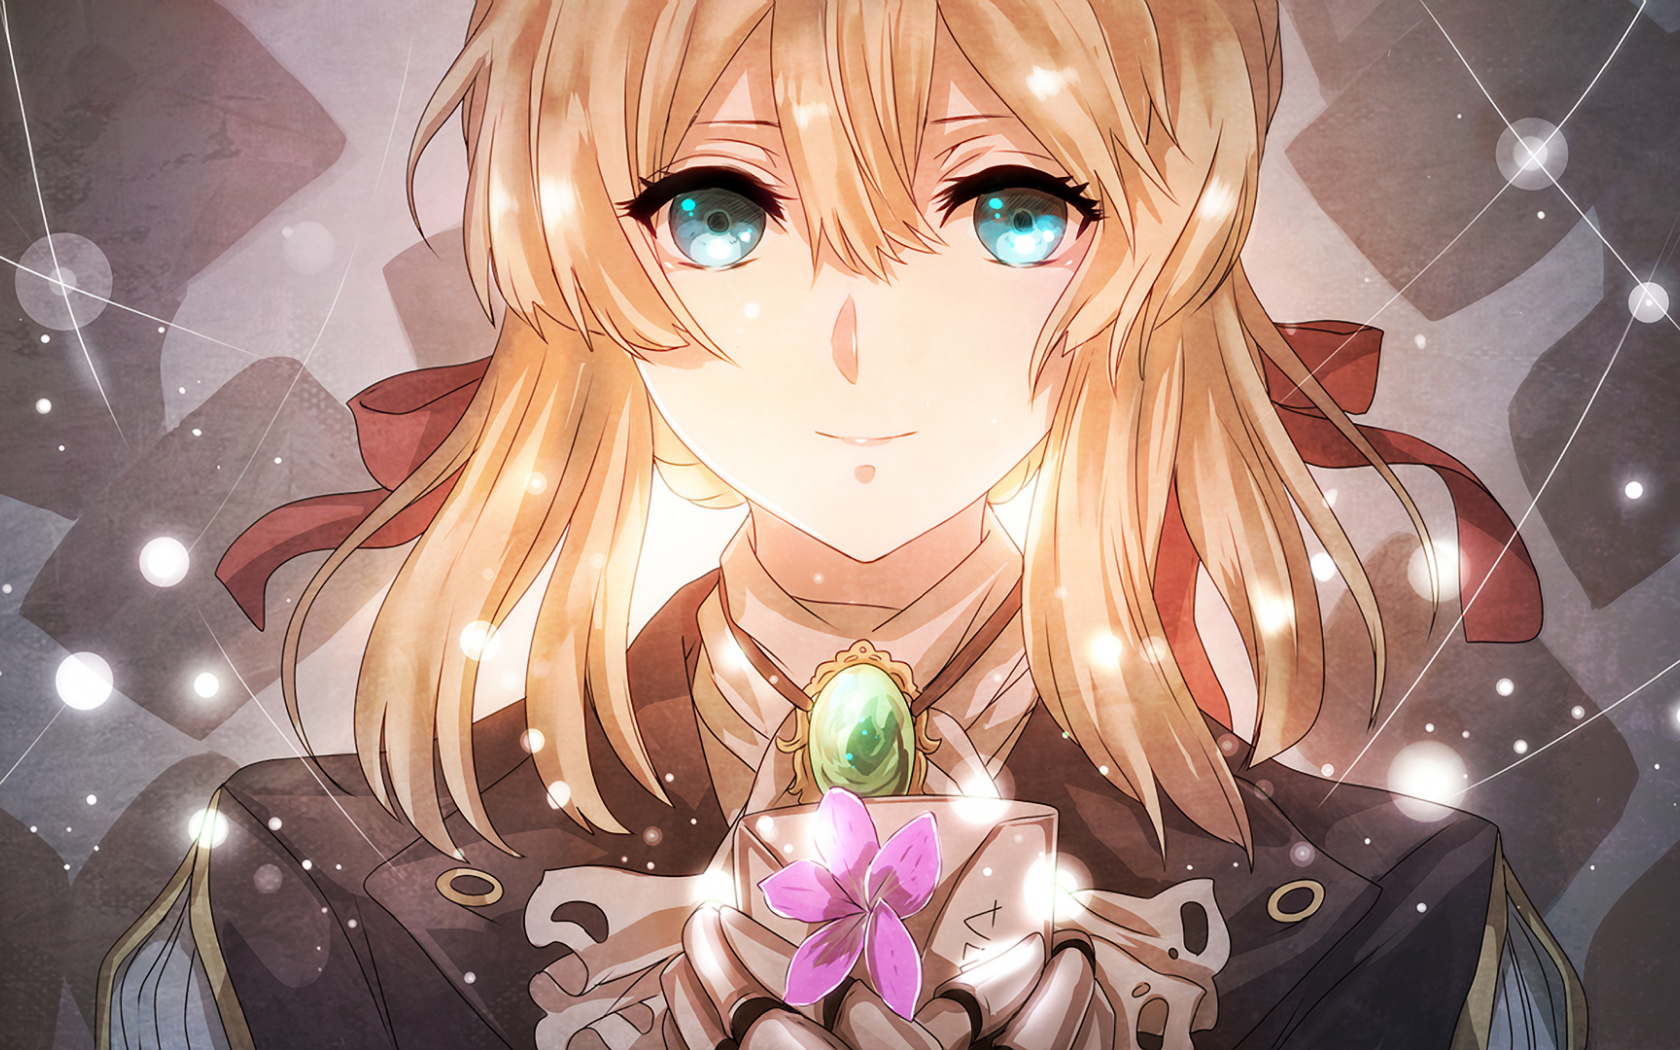 Download 1680x1050 wallpaper blonde and beautiful, anime, violet evergarden, widescreen 16: widescreen, 1680x1050 HD image, background, 5066